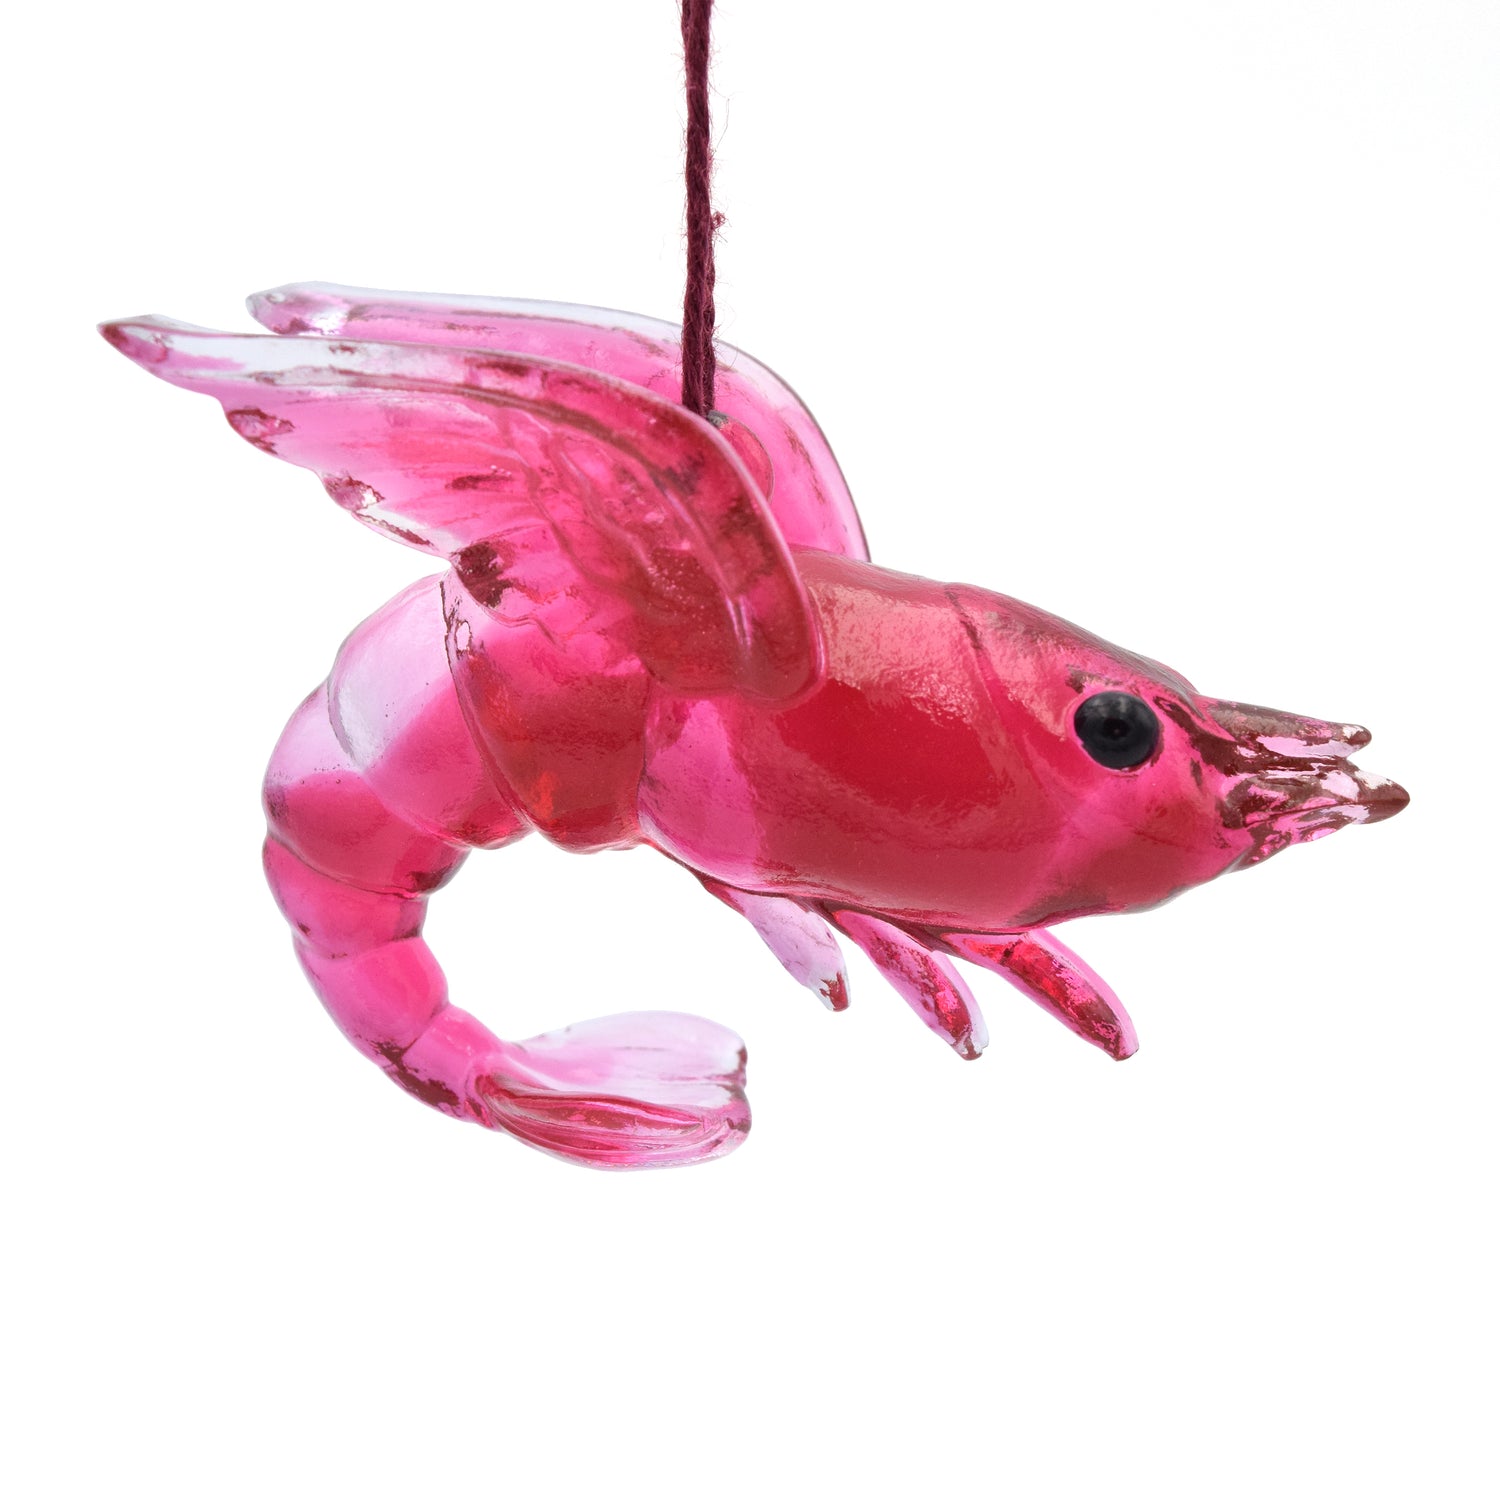  A translucent red shrimp ornament. The shrimp has wings and beady black eyes.